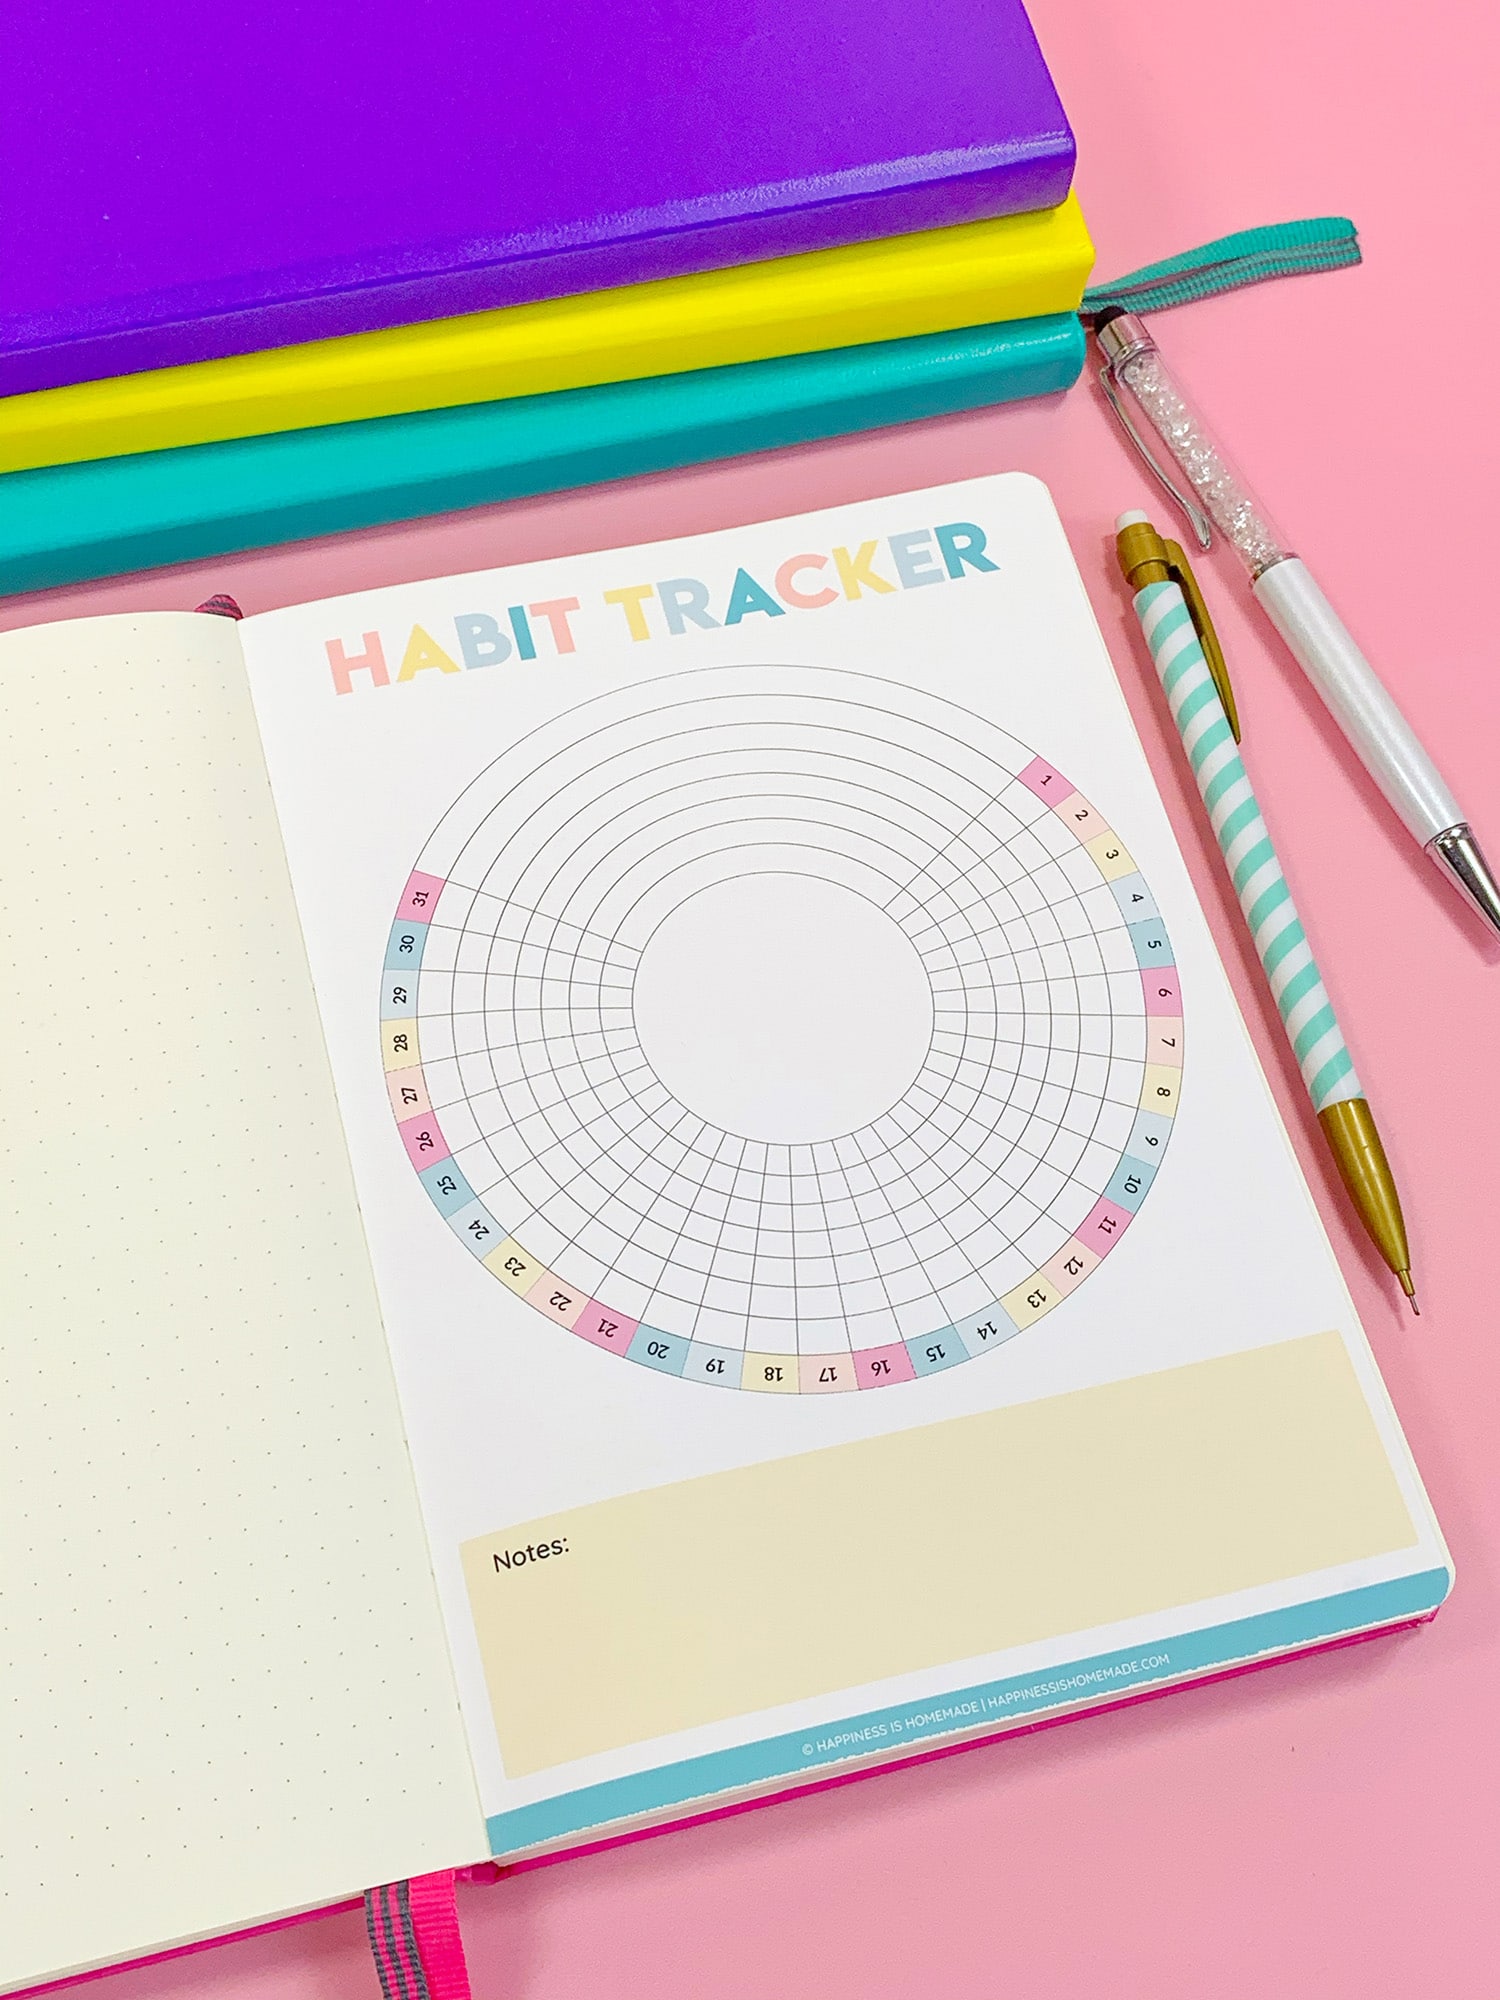 Printable Circle Habit Tracker in bullet journal on pink background with colorful pencils and stack of journals